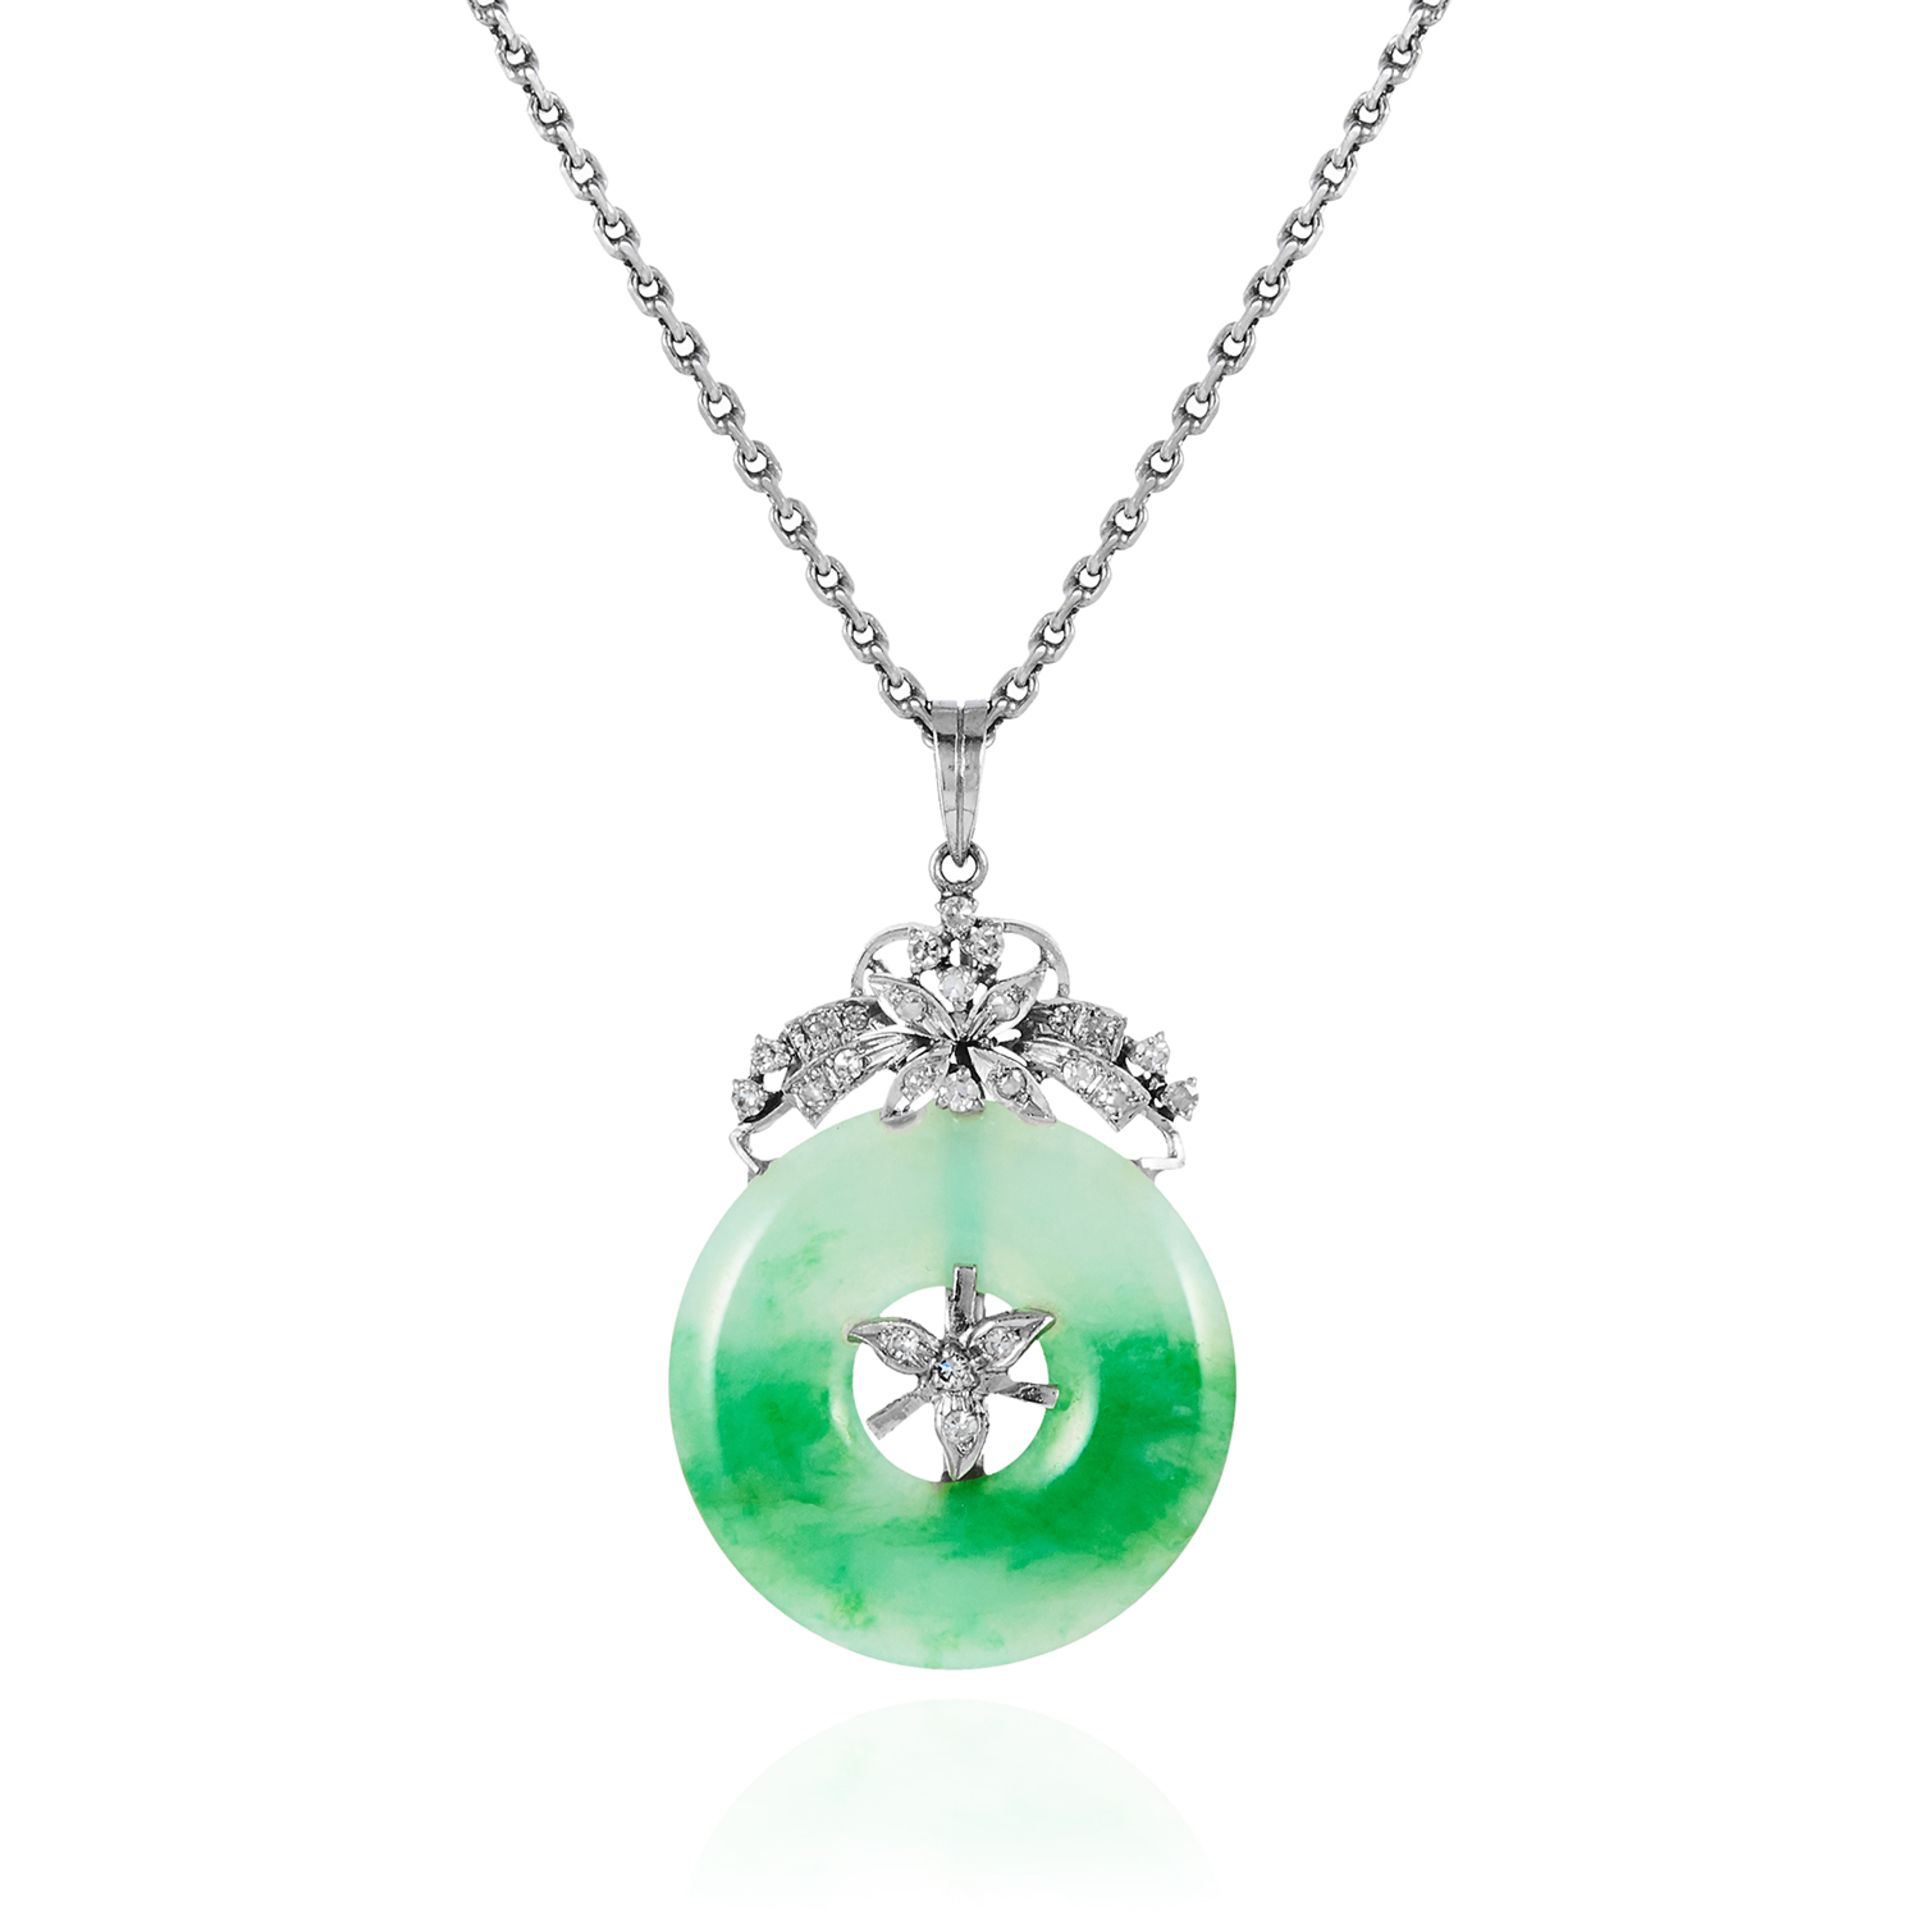 AN ANTIQUE CHINESE JADEITE JADE AND DIAMOND PENDANT AND CHAIN in 18ct white gold, the polished